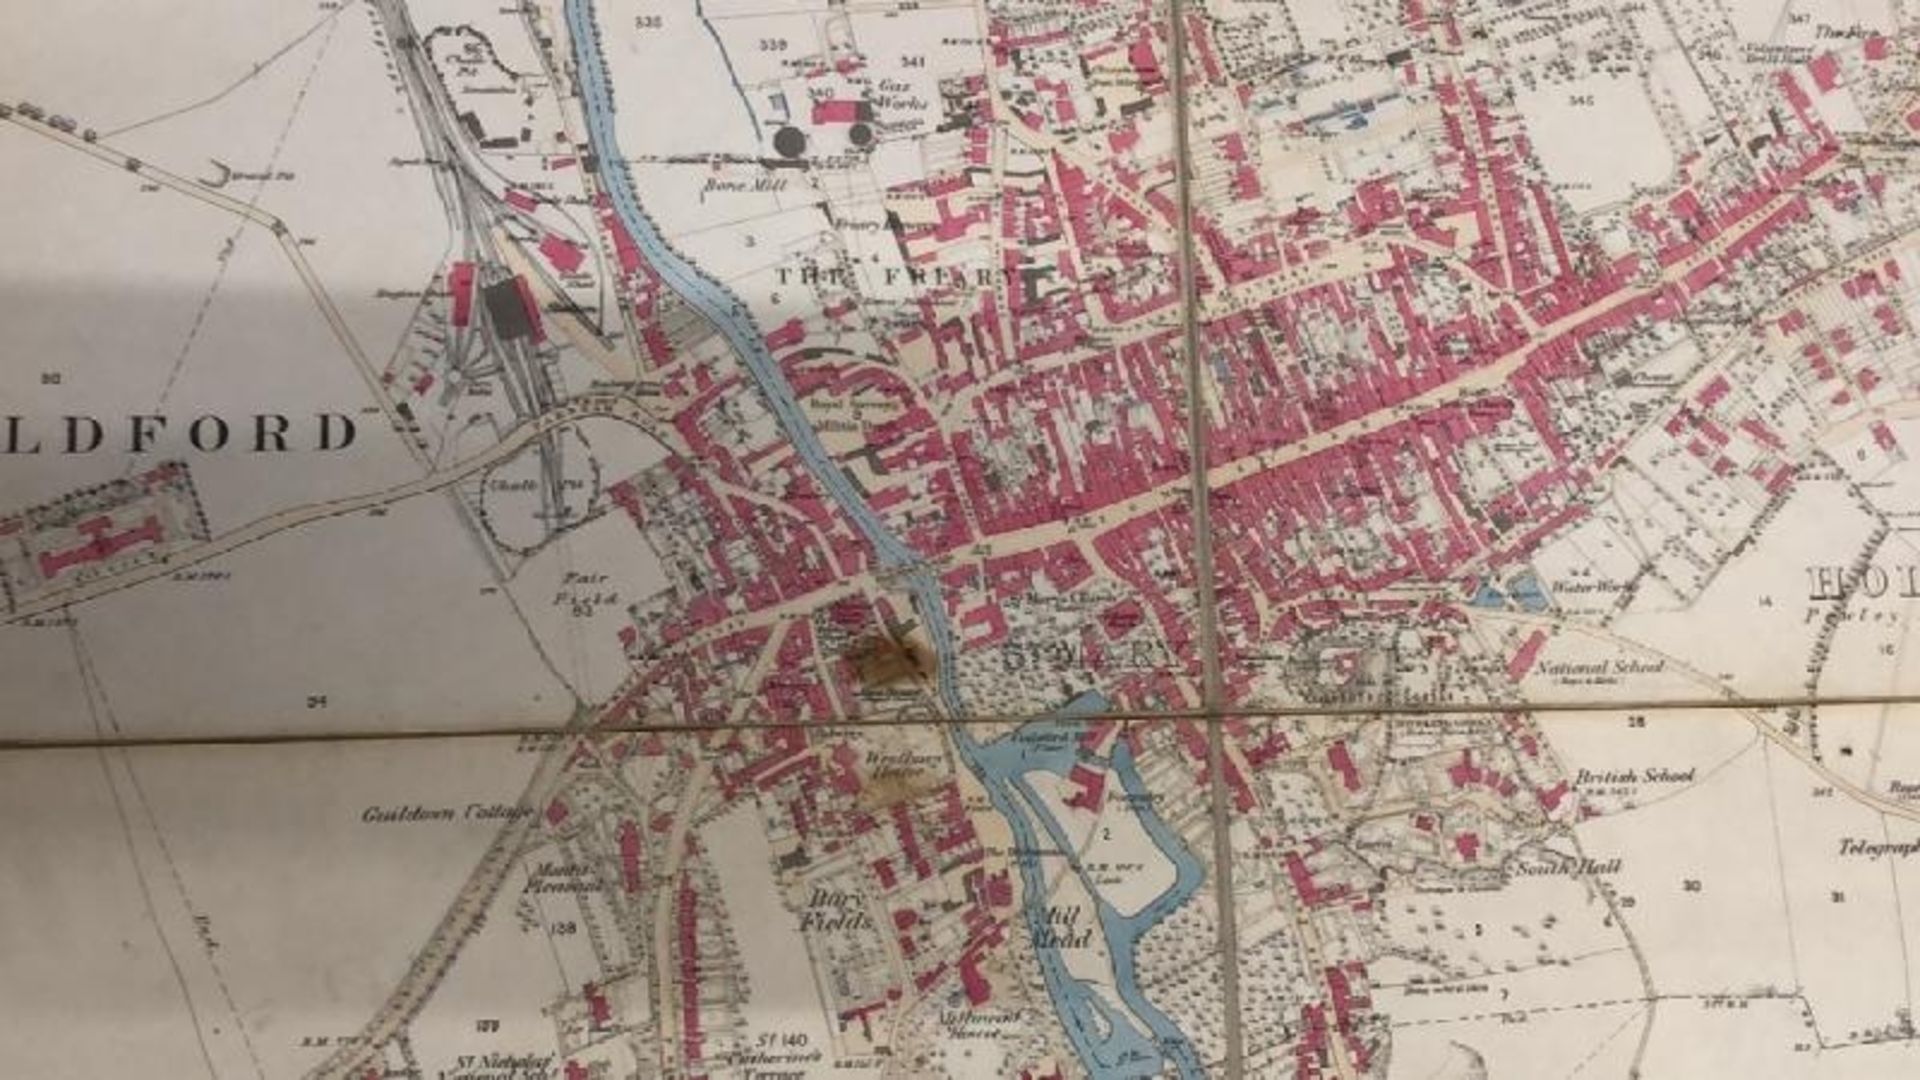 A large 25 inches to 1 mile scale map of Guildford, surveyed in 1827, 202.5cm x 134.5cm opened, - Image 14 of 16